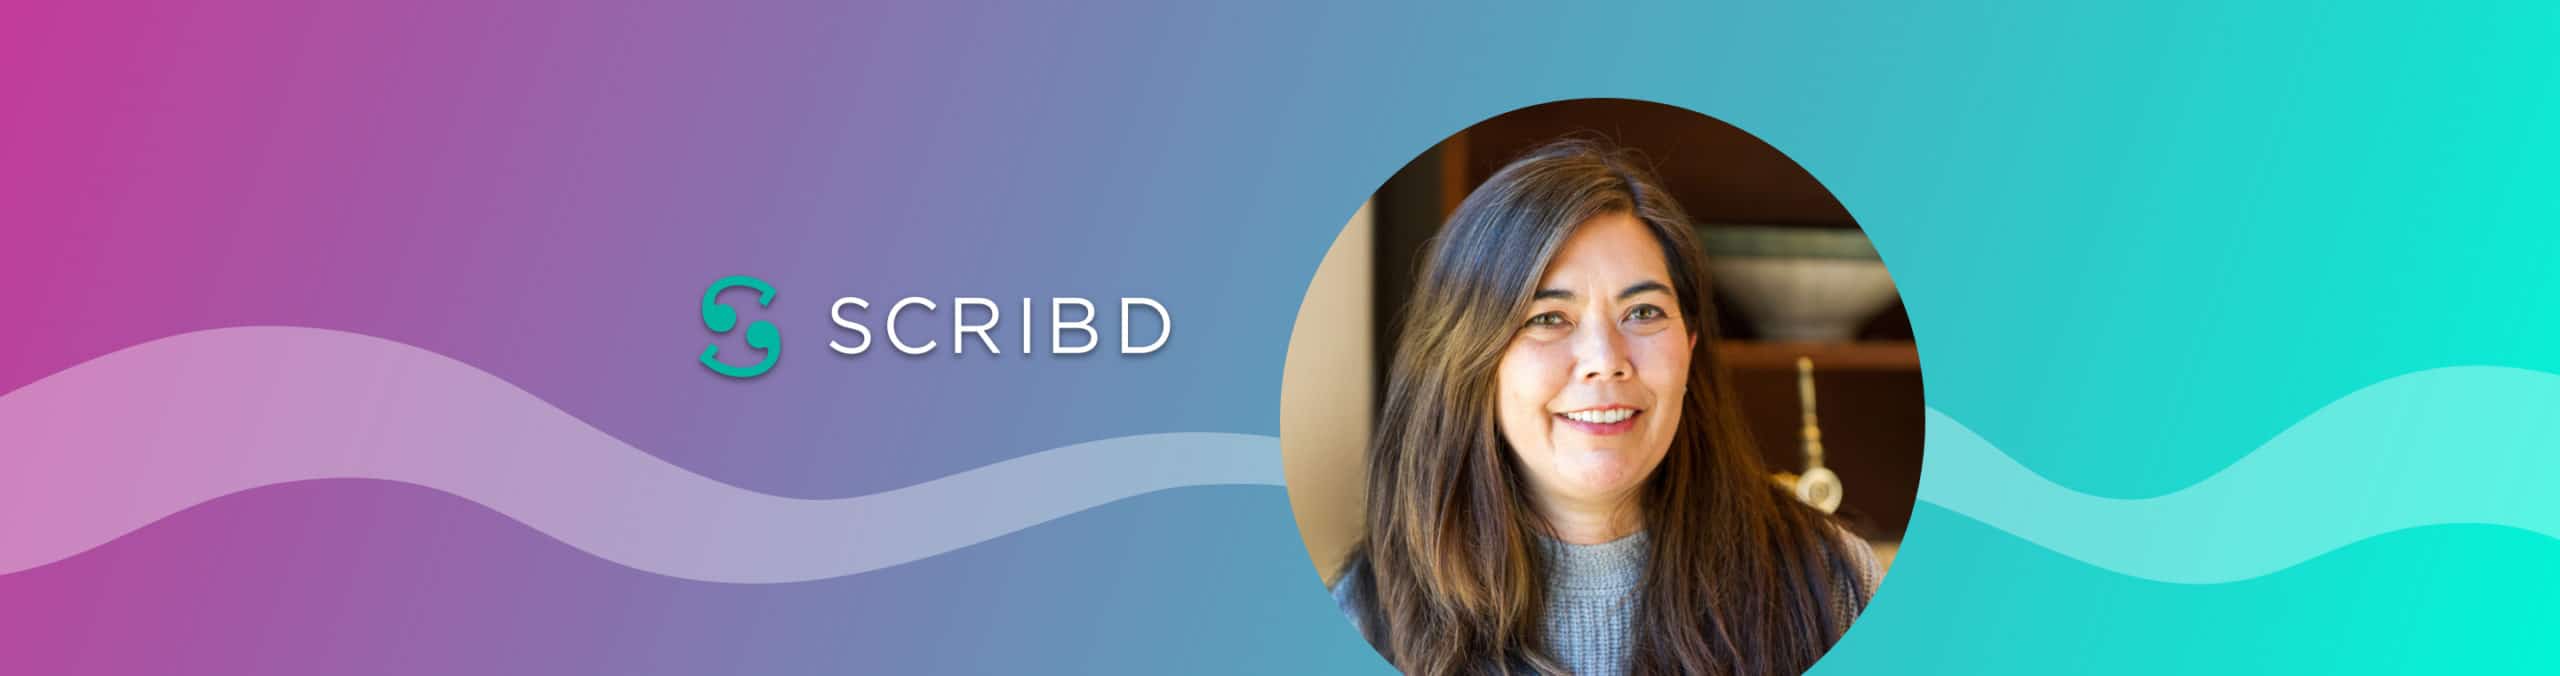 Laura Malinasky joins Scribdâ€™s Executive Team as Chief Legal Officer and General Counsel